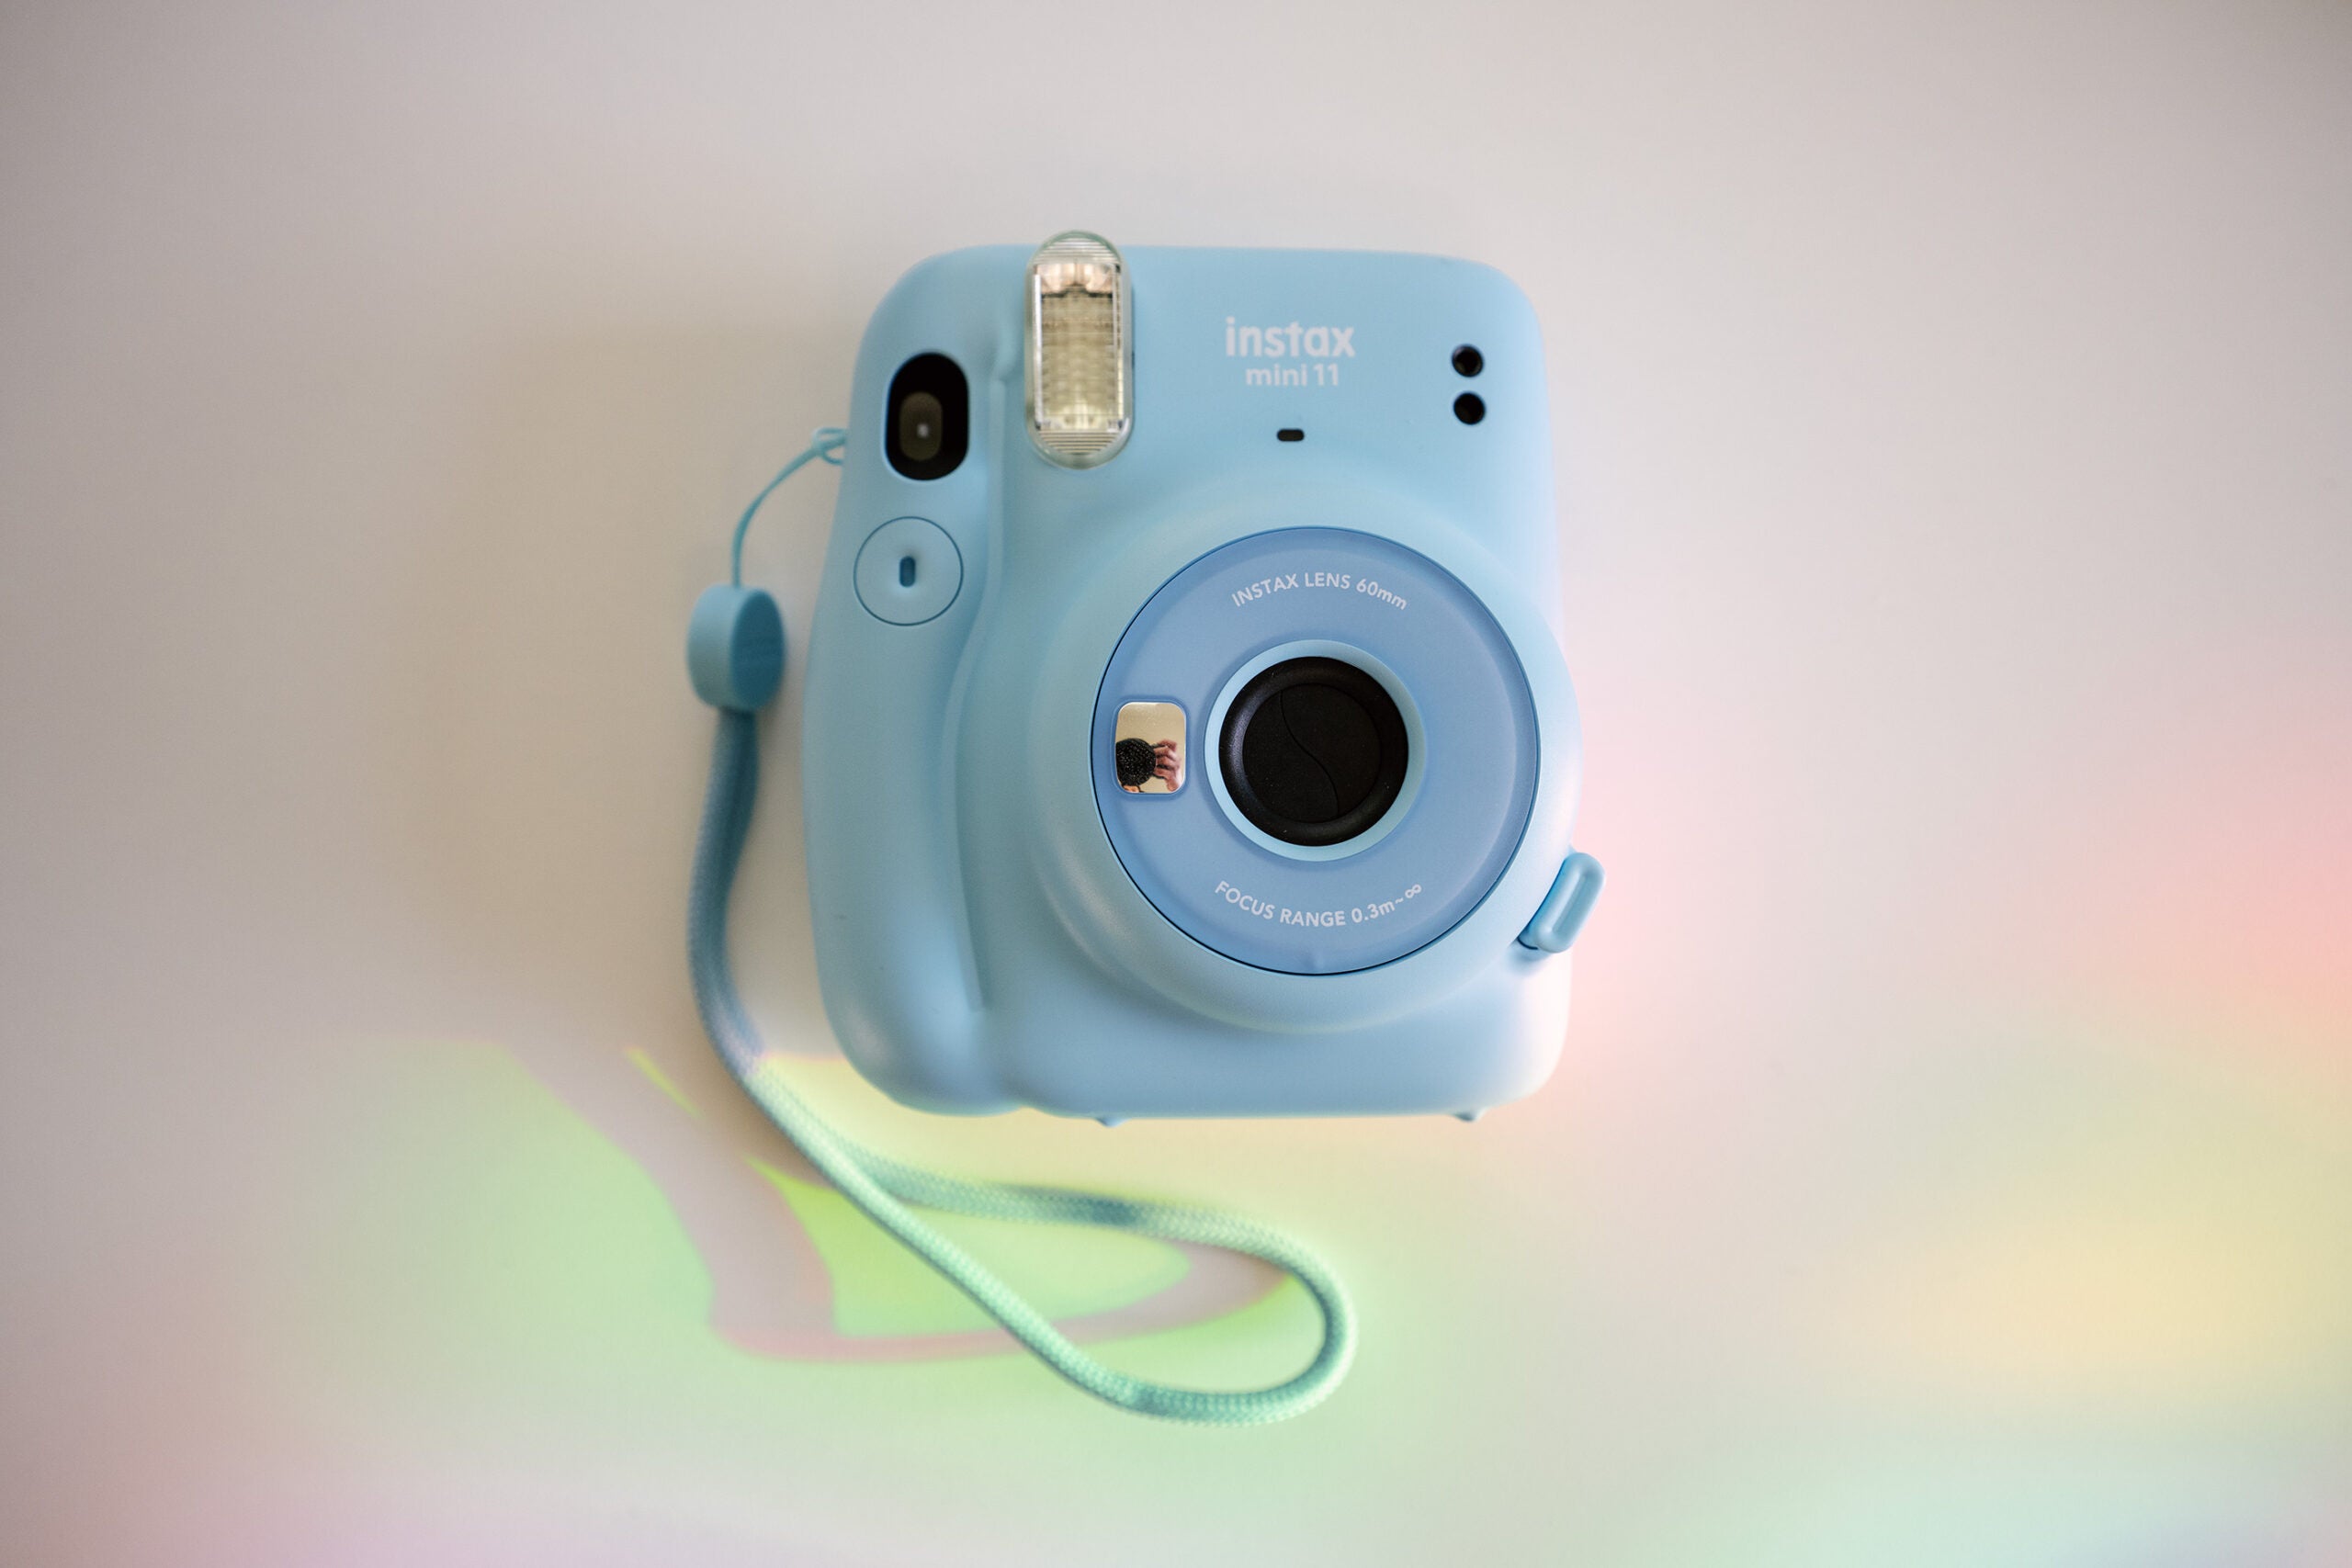 Gangster escaleren pepermunt Instax Mini 11 review: A fun party trick | Popular Photography